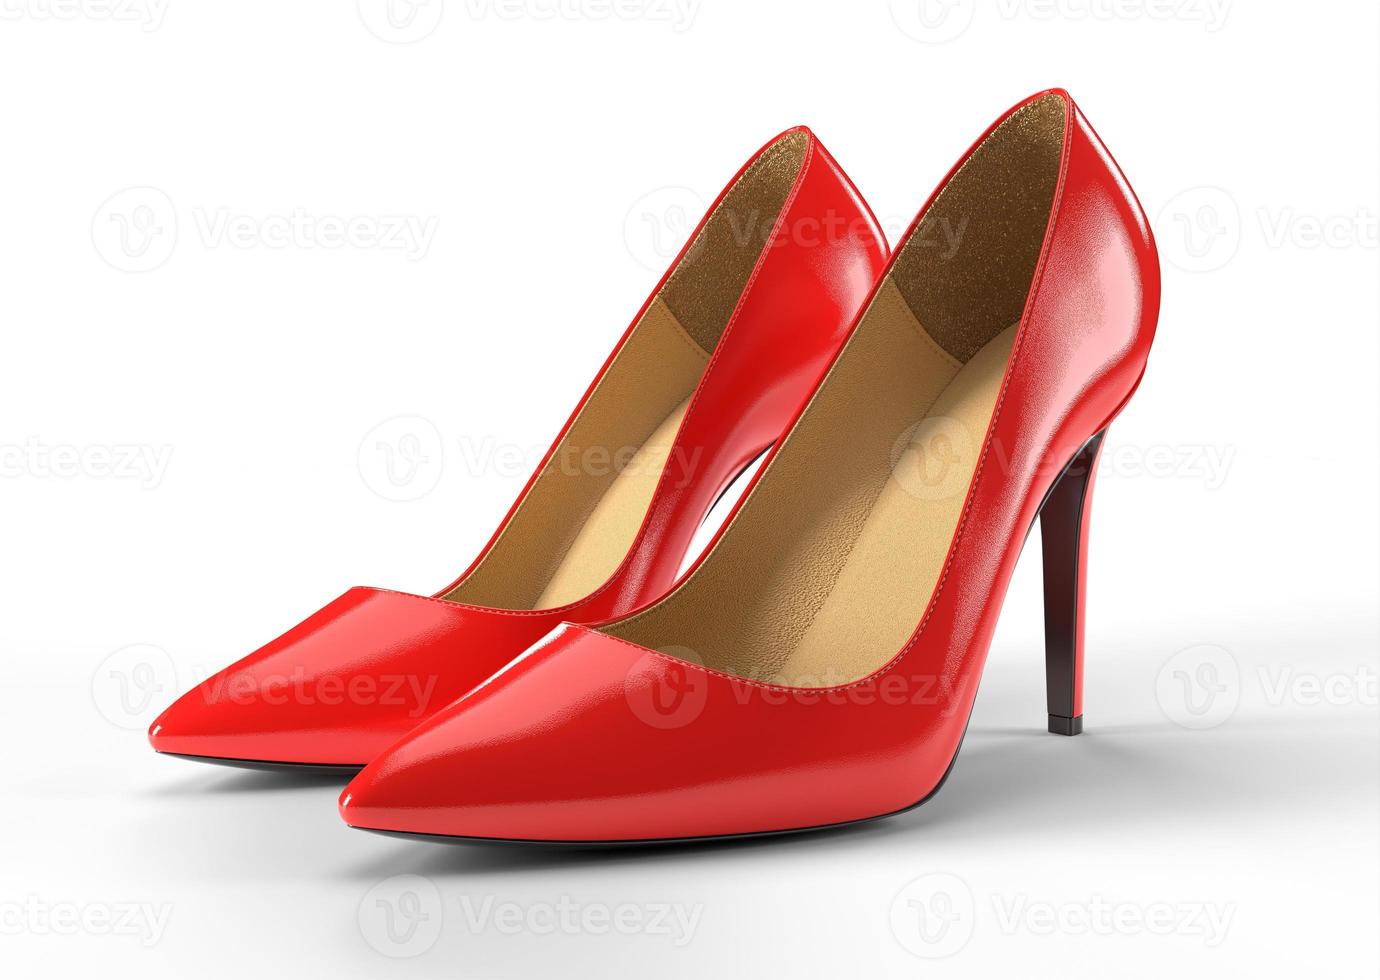 Red high heel women shoes isolated on white background. 3D rendering illustration. photo